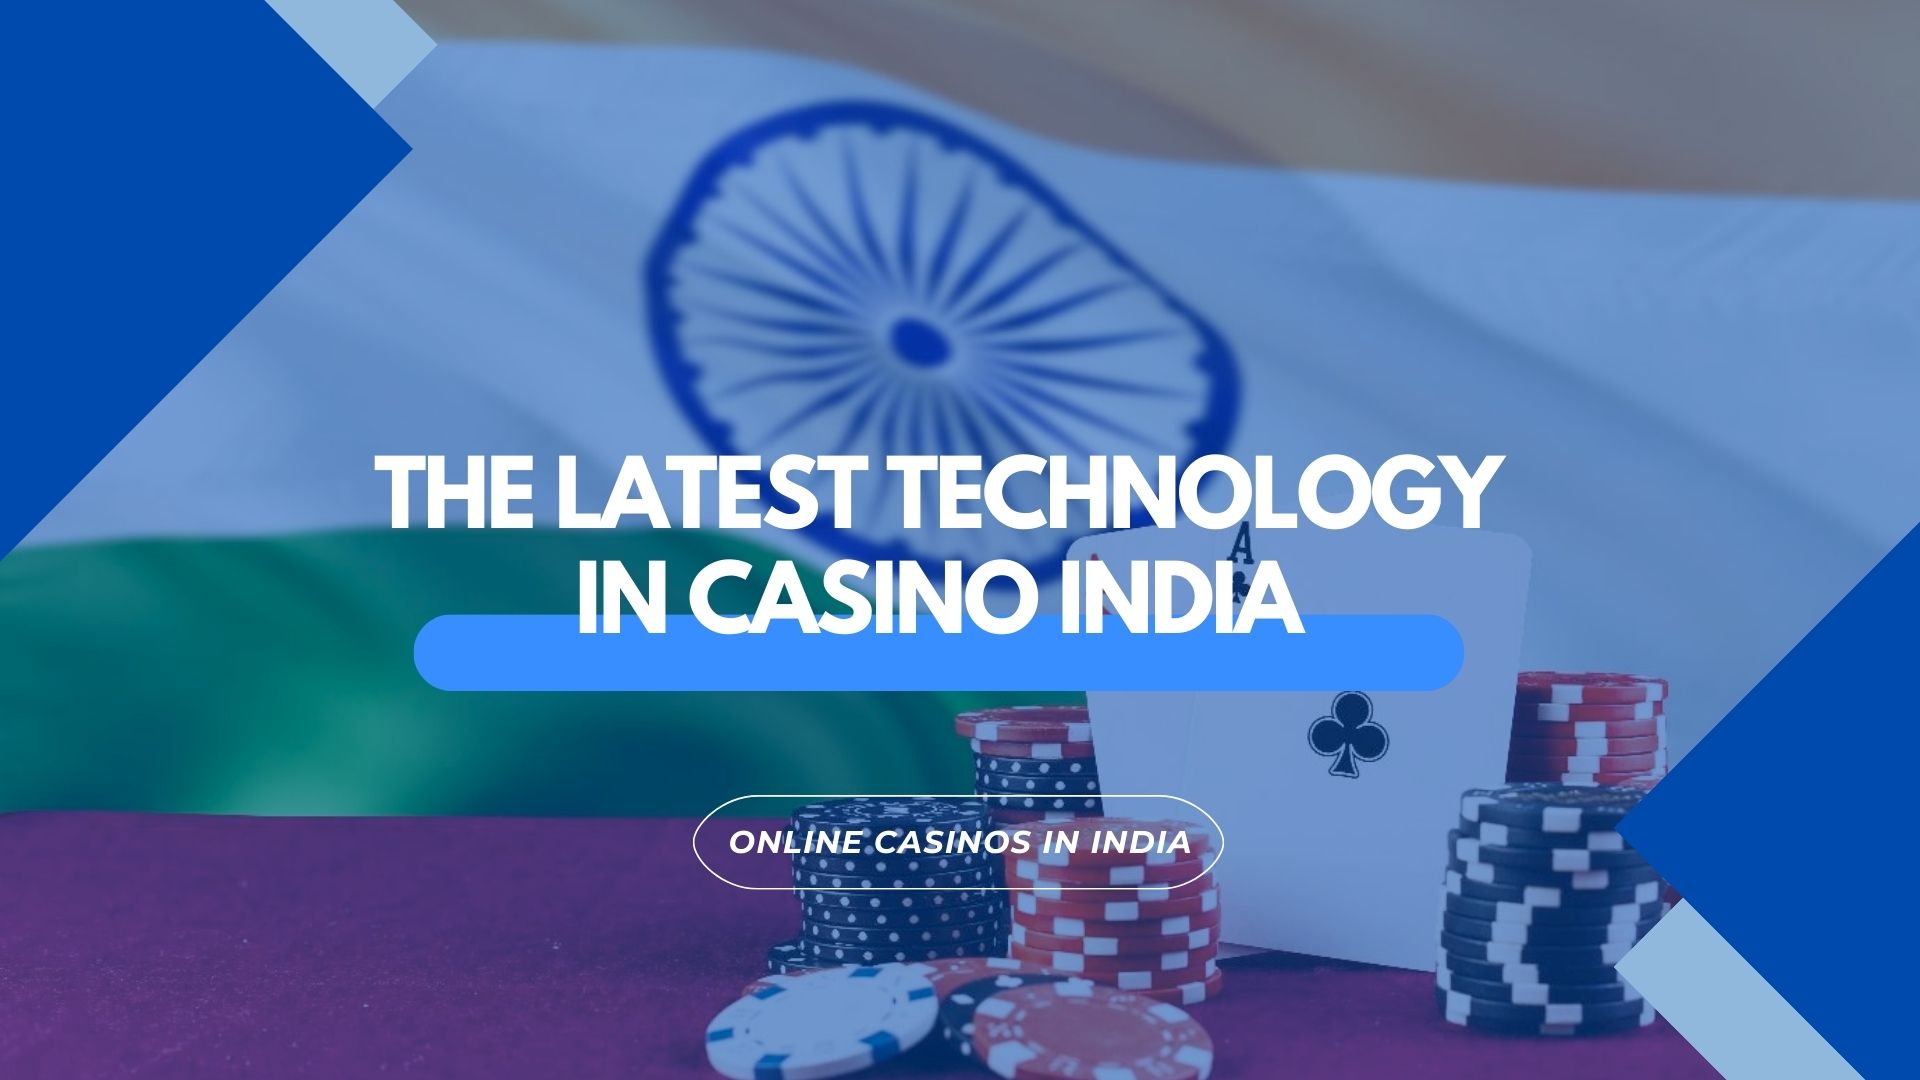 The Latest Technology in Casino India